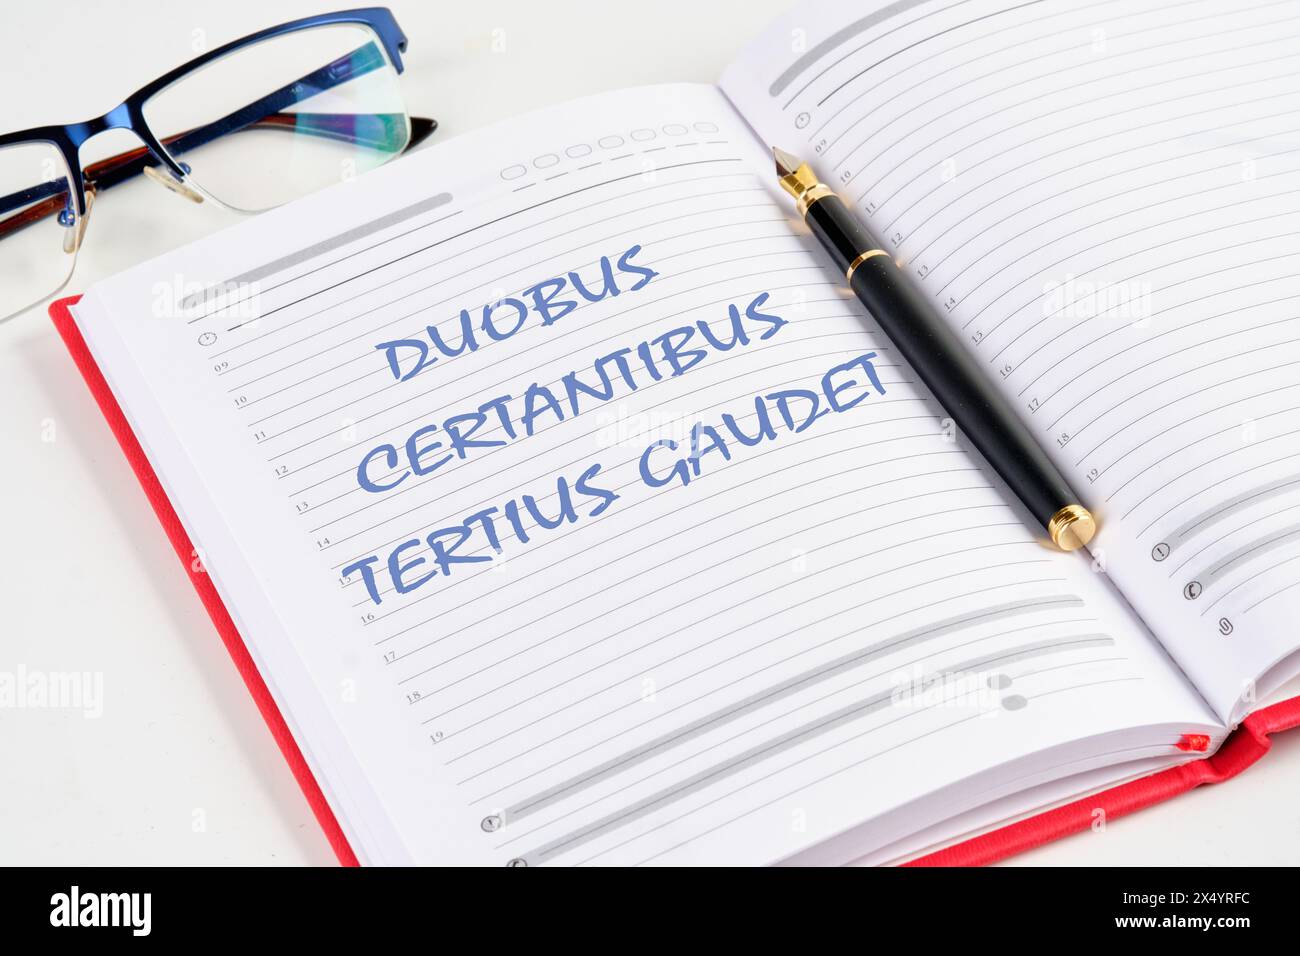 DUOBUS CERTANTIBUS TERTIUS GAUDET it means in Latin While two argue, the third rejoices. the inscription in the notebook Stock Photo